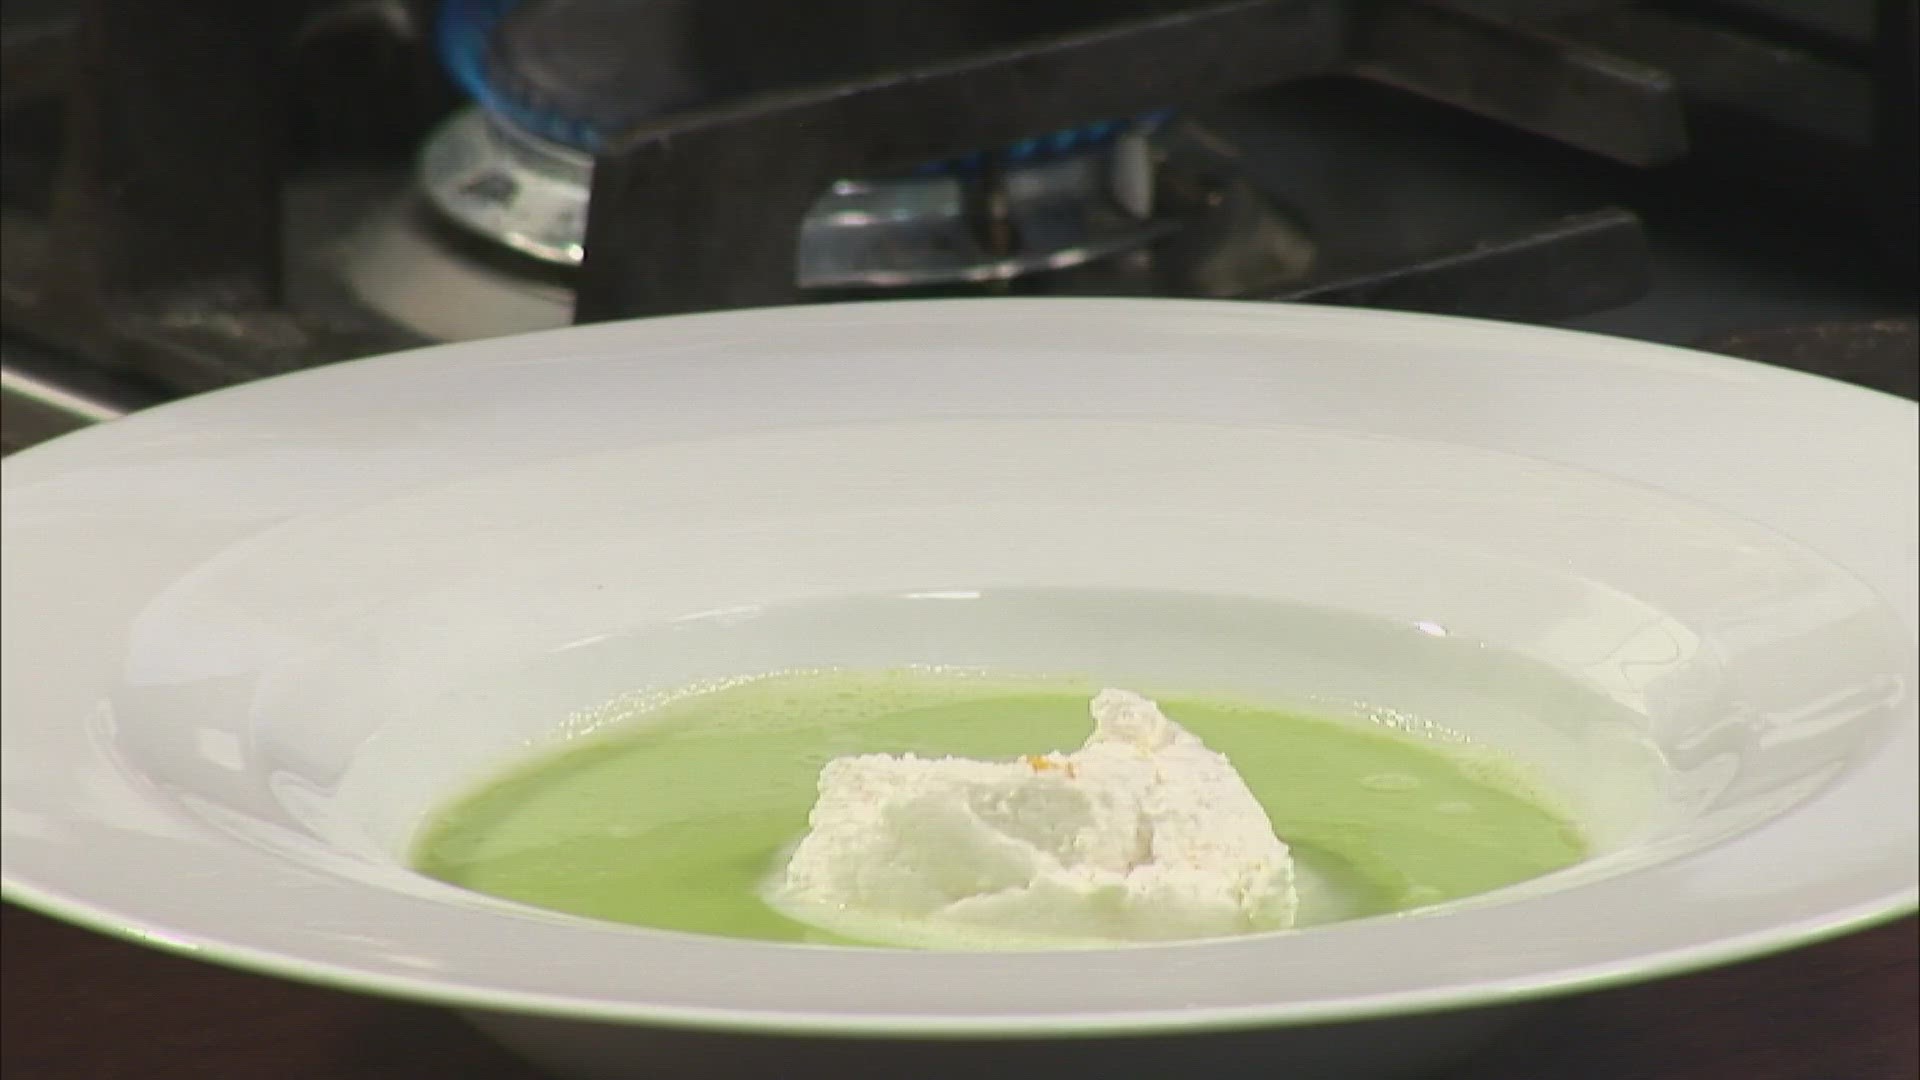 Chef Peter Rudolph from Cape Arundel Inn joins us in the kitchen to share his recipe for Spring Pea Soup.